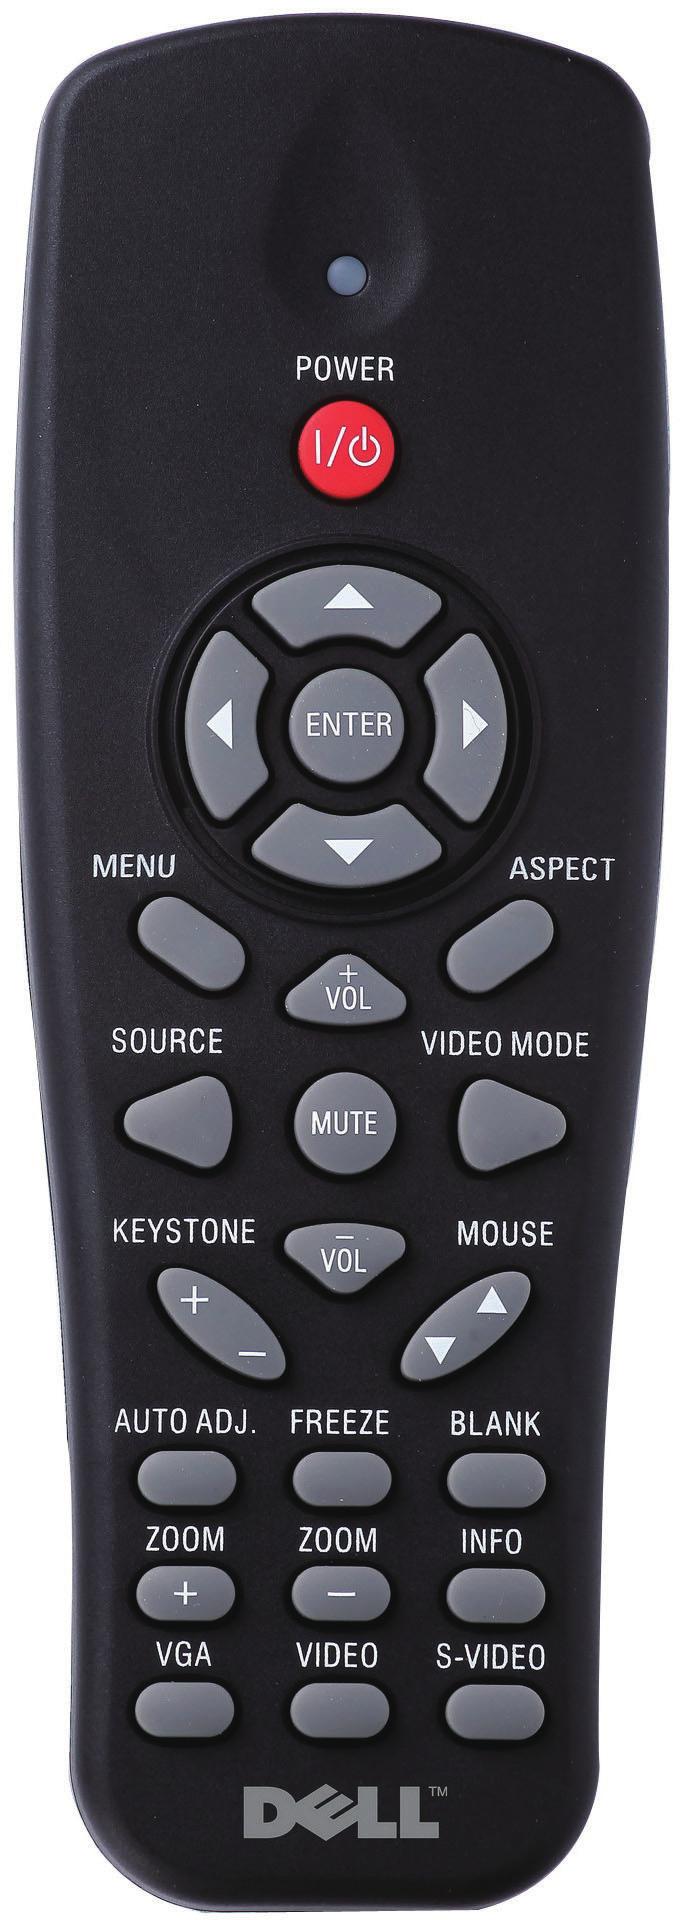 Using the Remote Control 1 14 15 16 17 18 19 20 21 22 23 24 25 26 2 3 4 5 6 7 8 9 10 11 12 13 1 Power Turns the projector on or off.